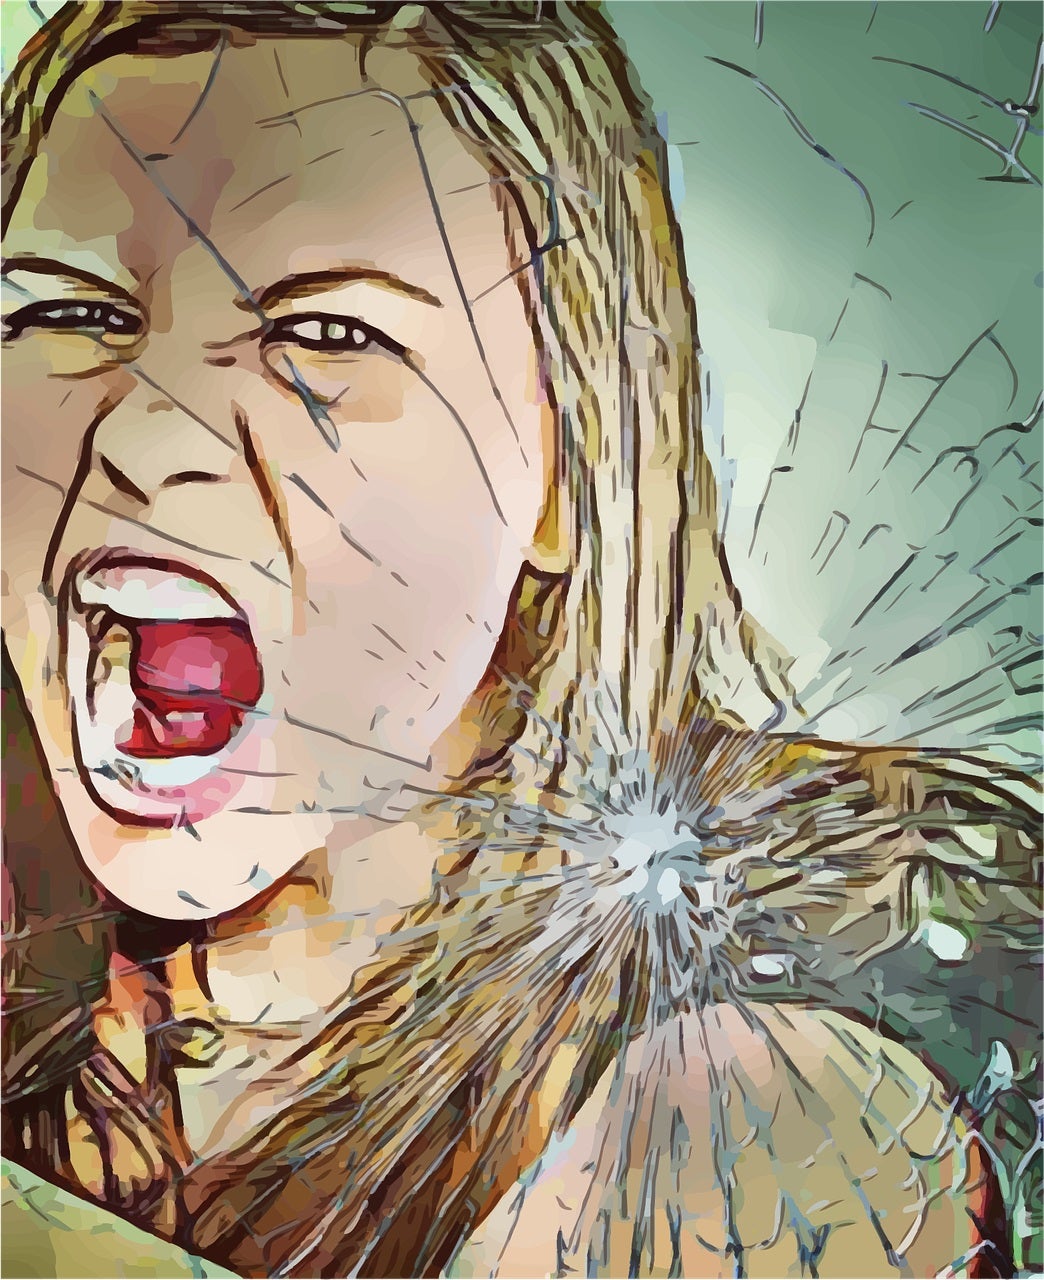 A picture edit of a blonde woman yelling is overlaid with a broken glass 